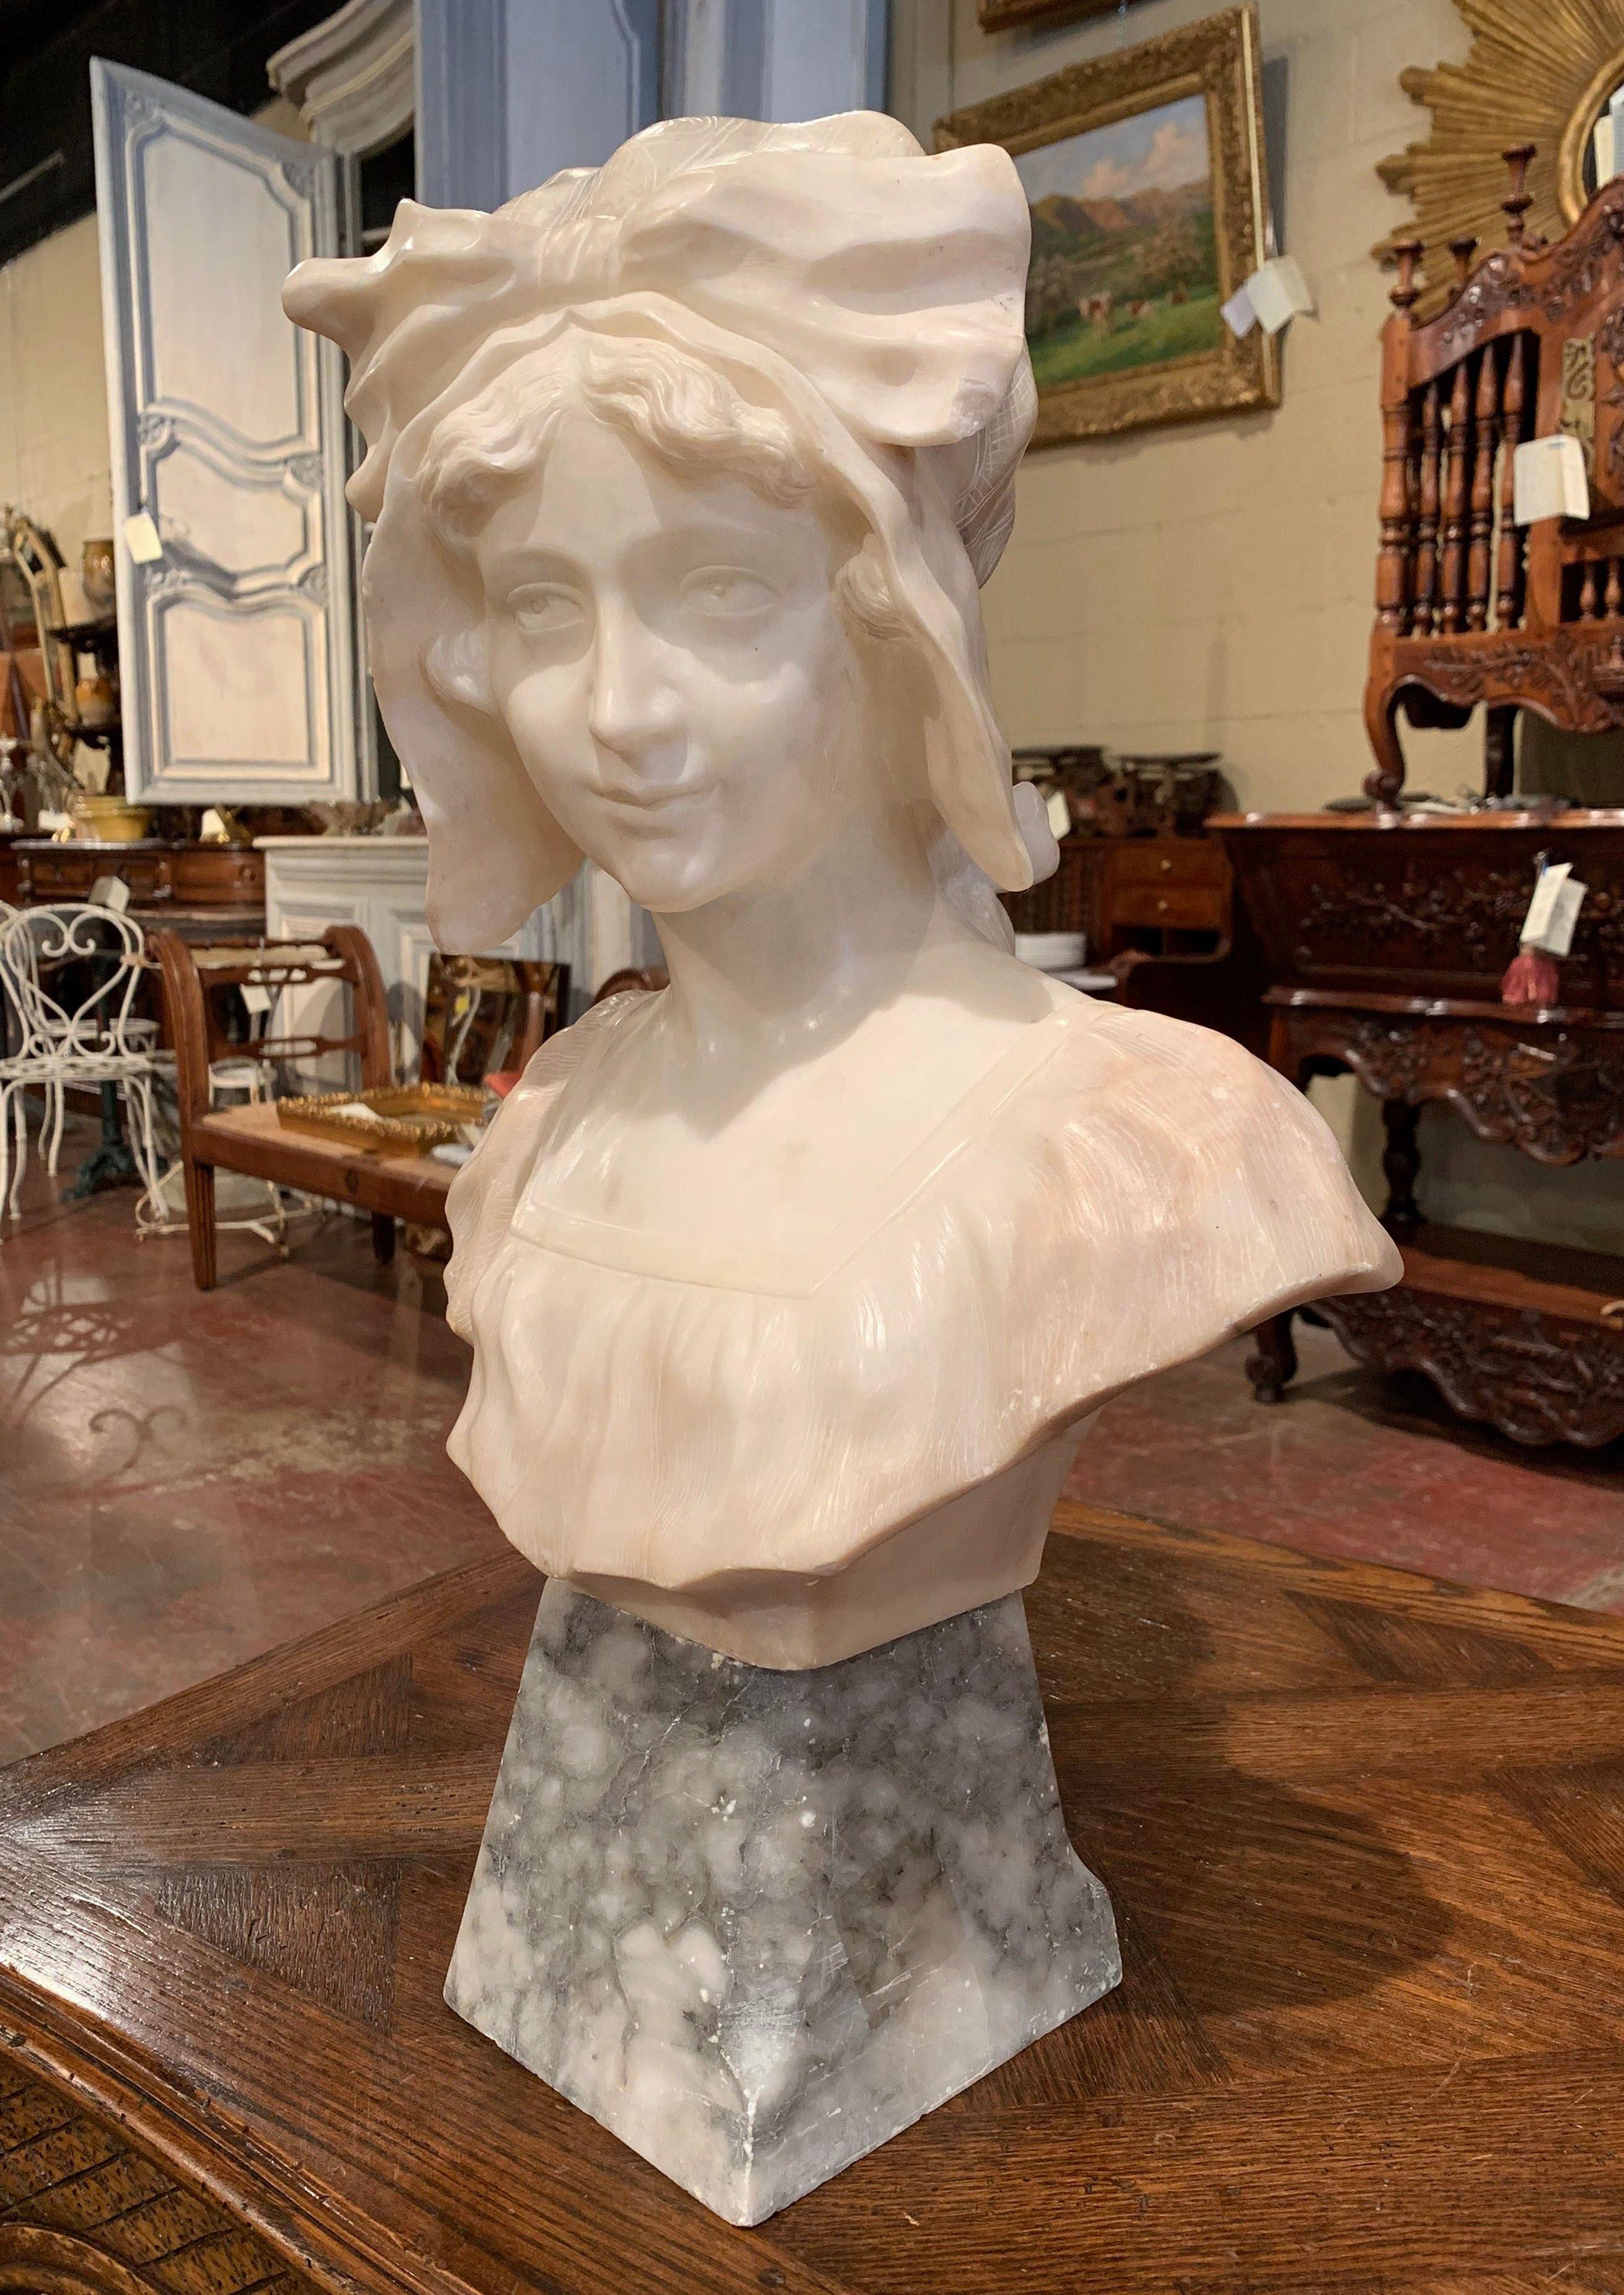 Crafted in France circa 1850, this large antique marble bust is a true representation of French elegance. Made in two sections (bust and separate base) of white and grey marble, the figural sculpture features a beautiful young beauty with hat and